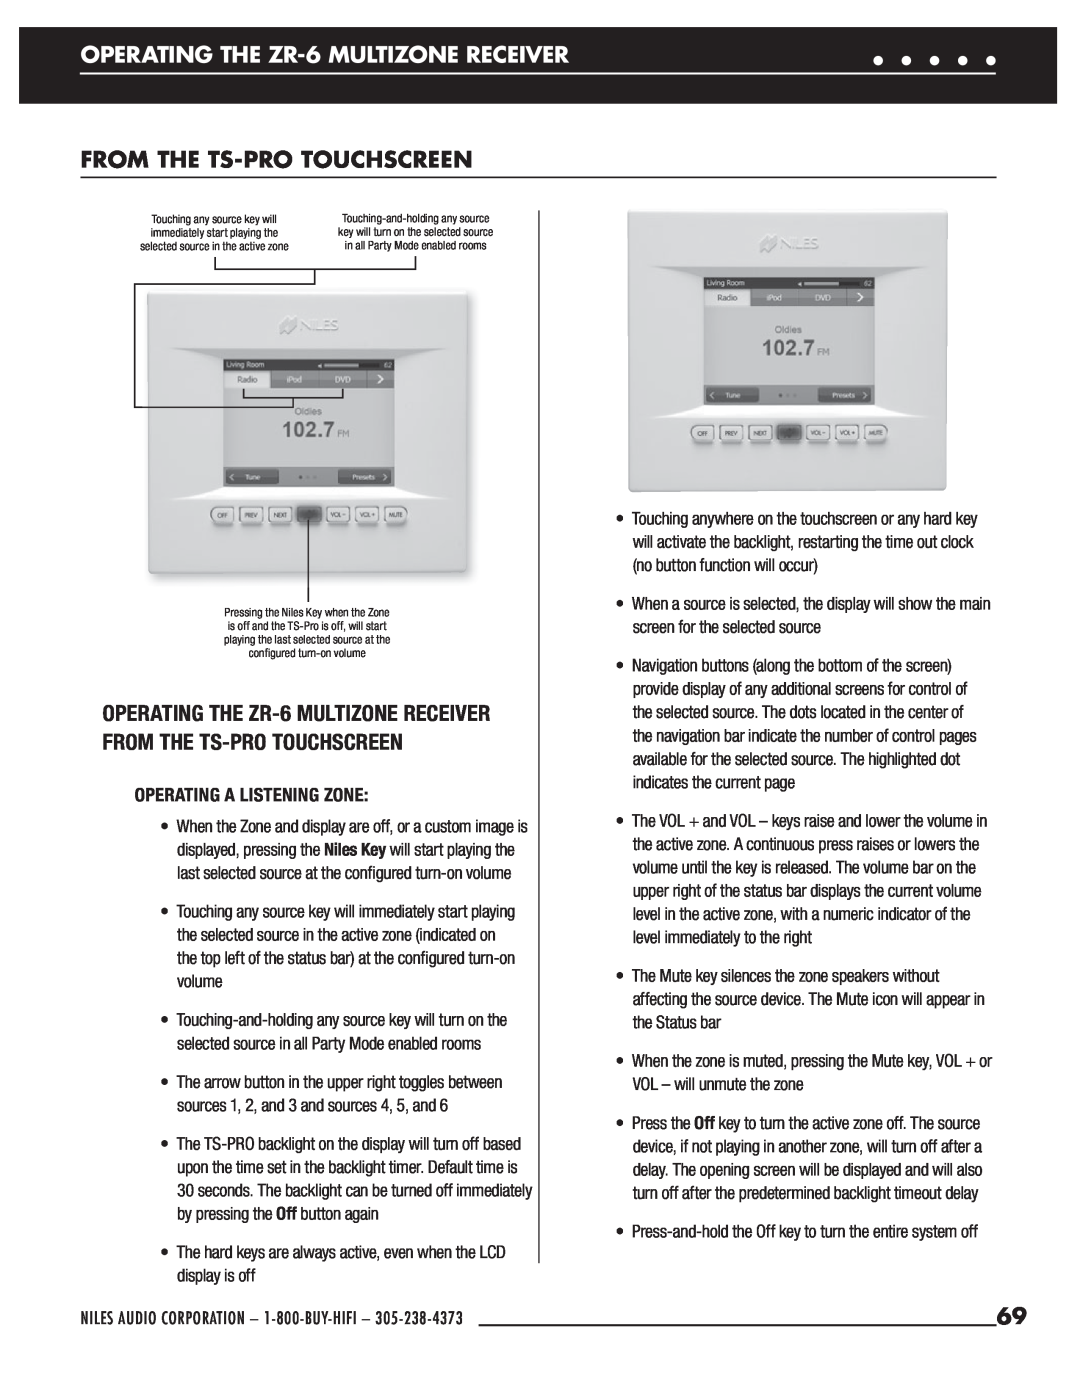 Niles Audio manual From The Ts-Protouchscreen, OPERATING THE ZR-6MULTIZONE RECEIVER, Operating A Listening Zone 